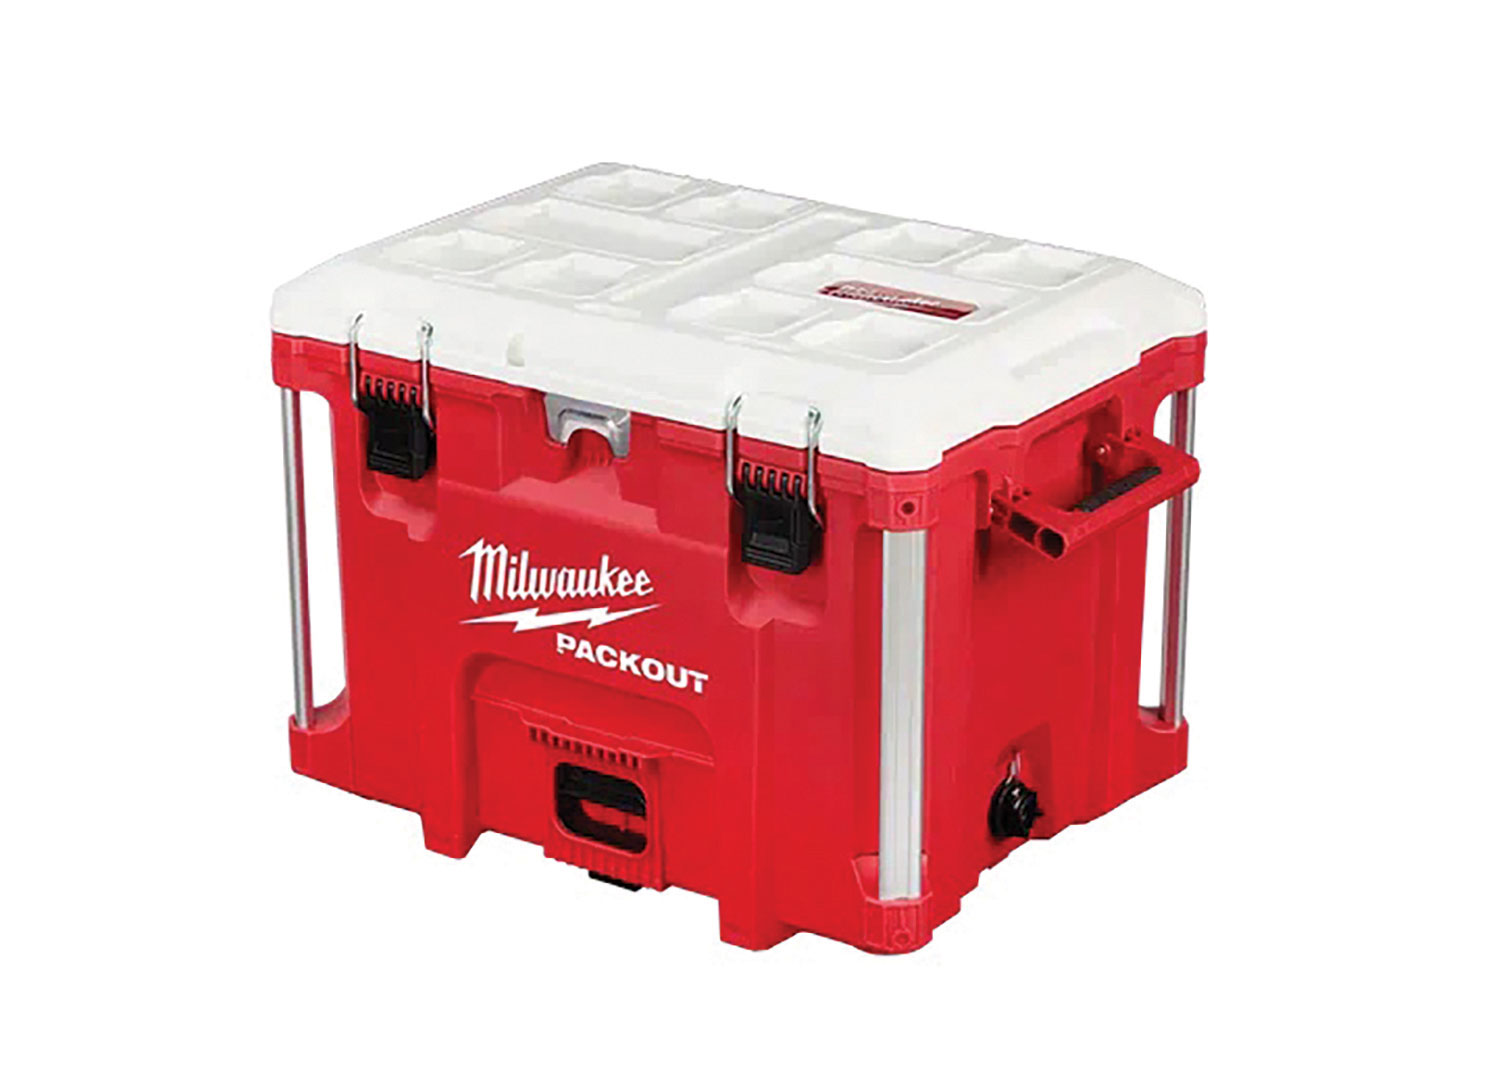 Red cooler with metal posts and the Milwaukee logo. Image by Milwaukee Tool.